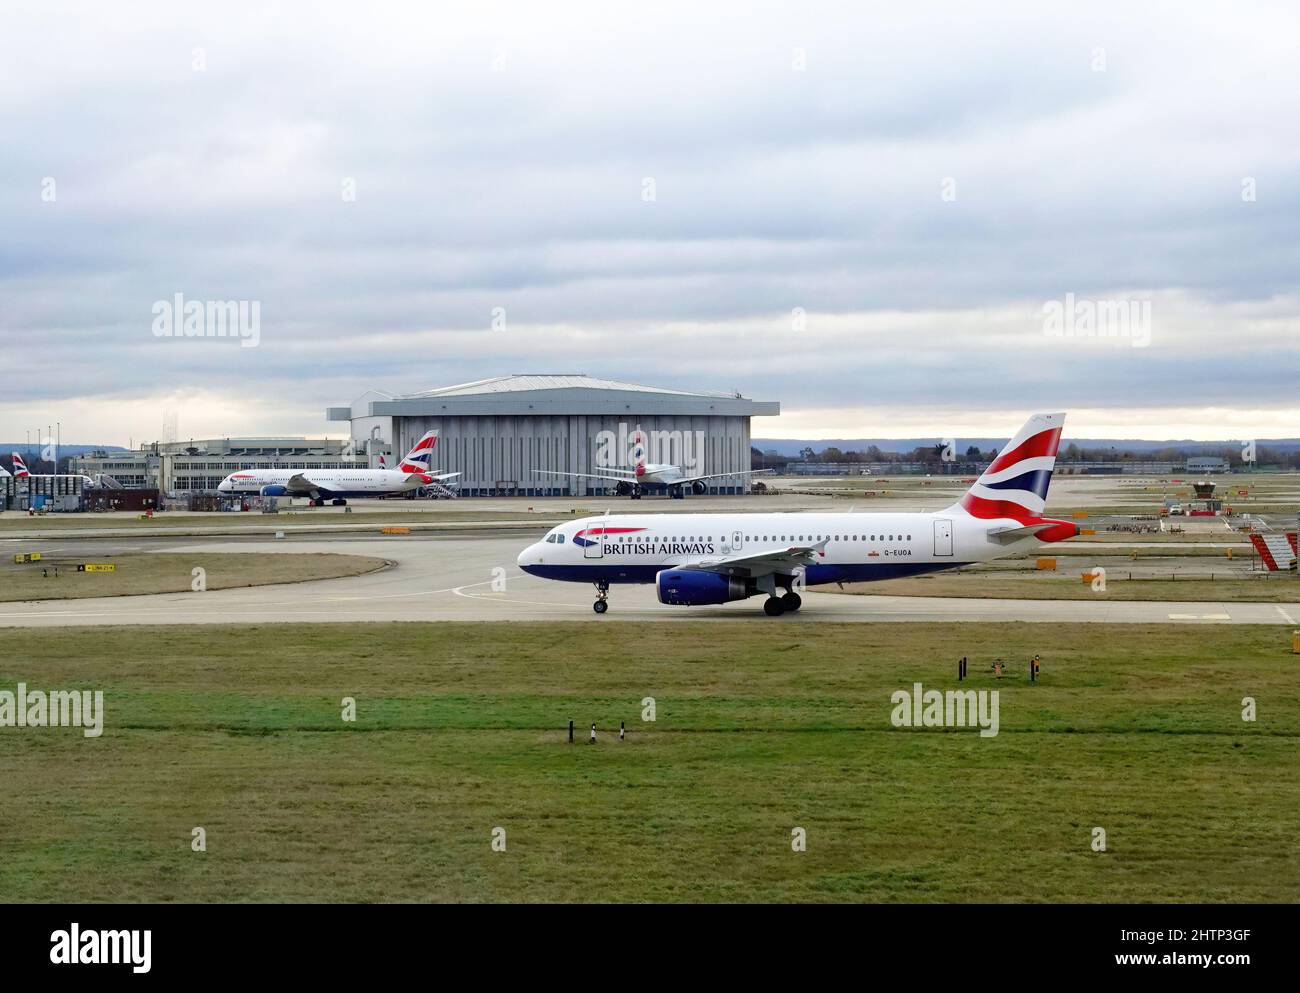 A British Airways jet on the taxiway at London Heathrow airport. Stock Photo